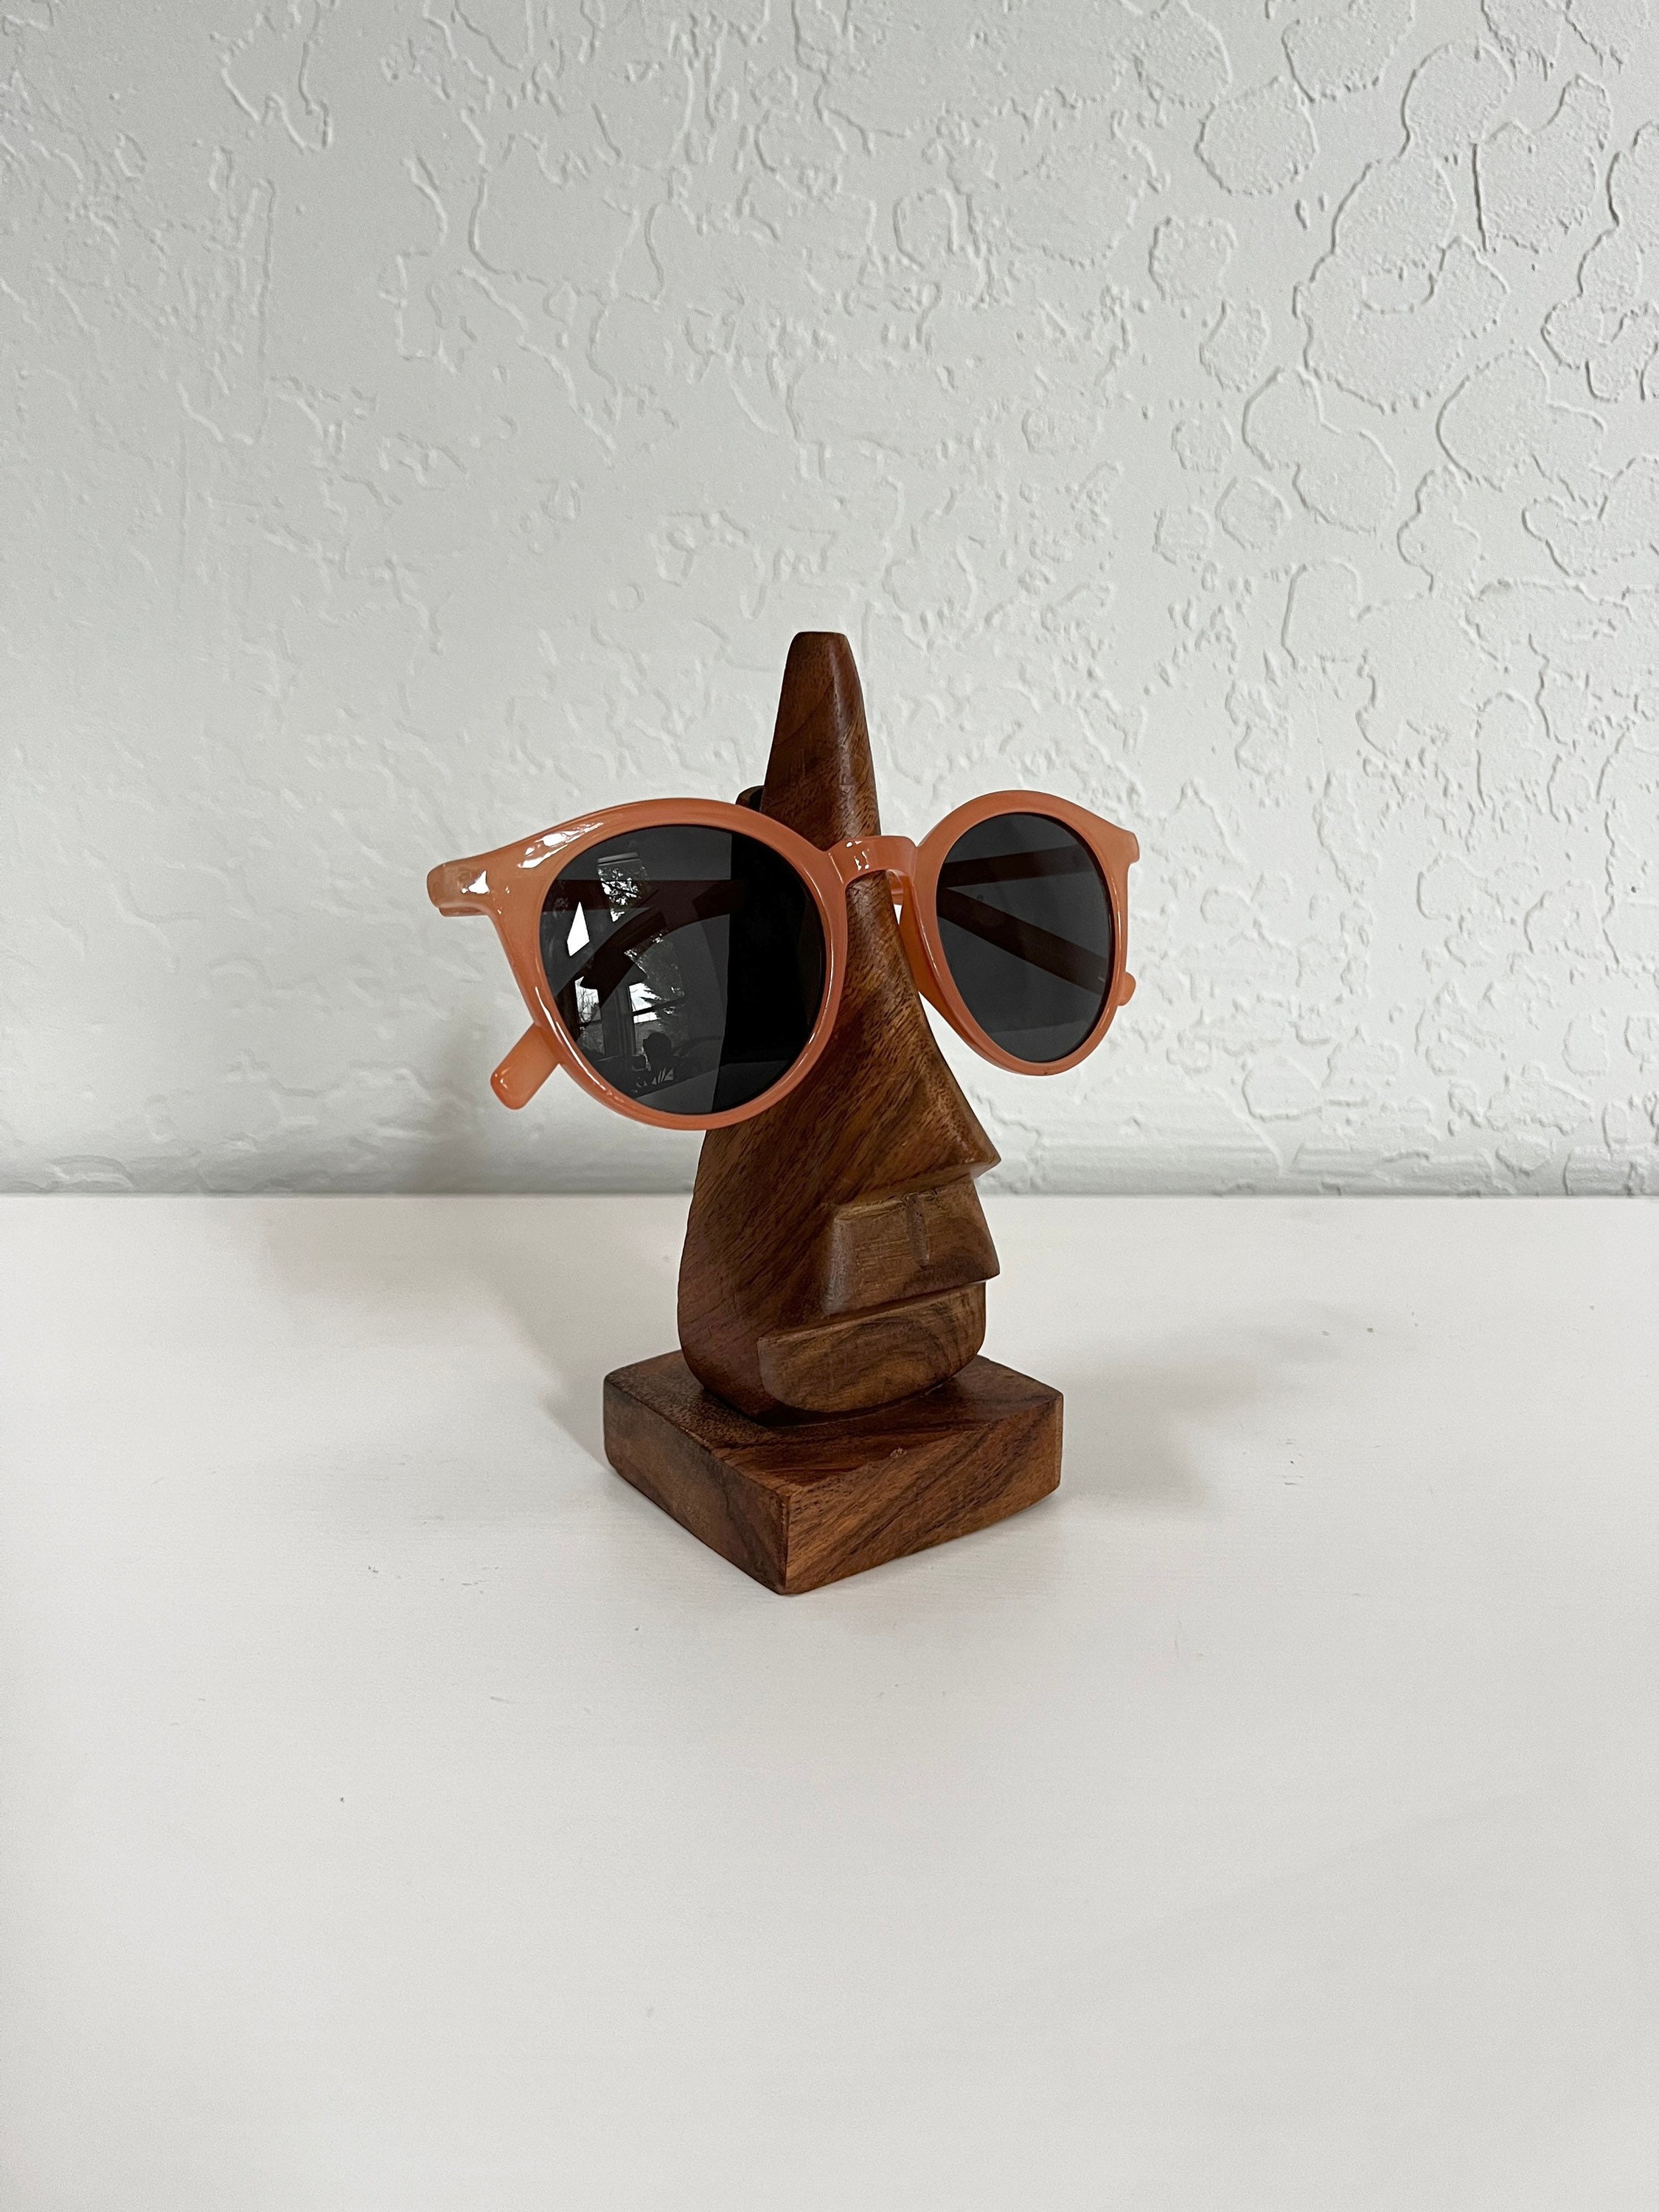 NIRMAN 6 Inch Wooden Nose Shaped Eyeglass Holder/Spectacle Display  Stand-Unique Desktop Accessory and Gifts Home Décor